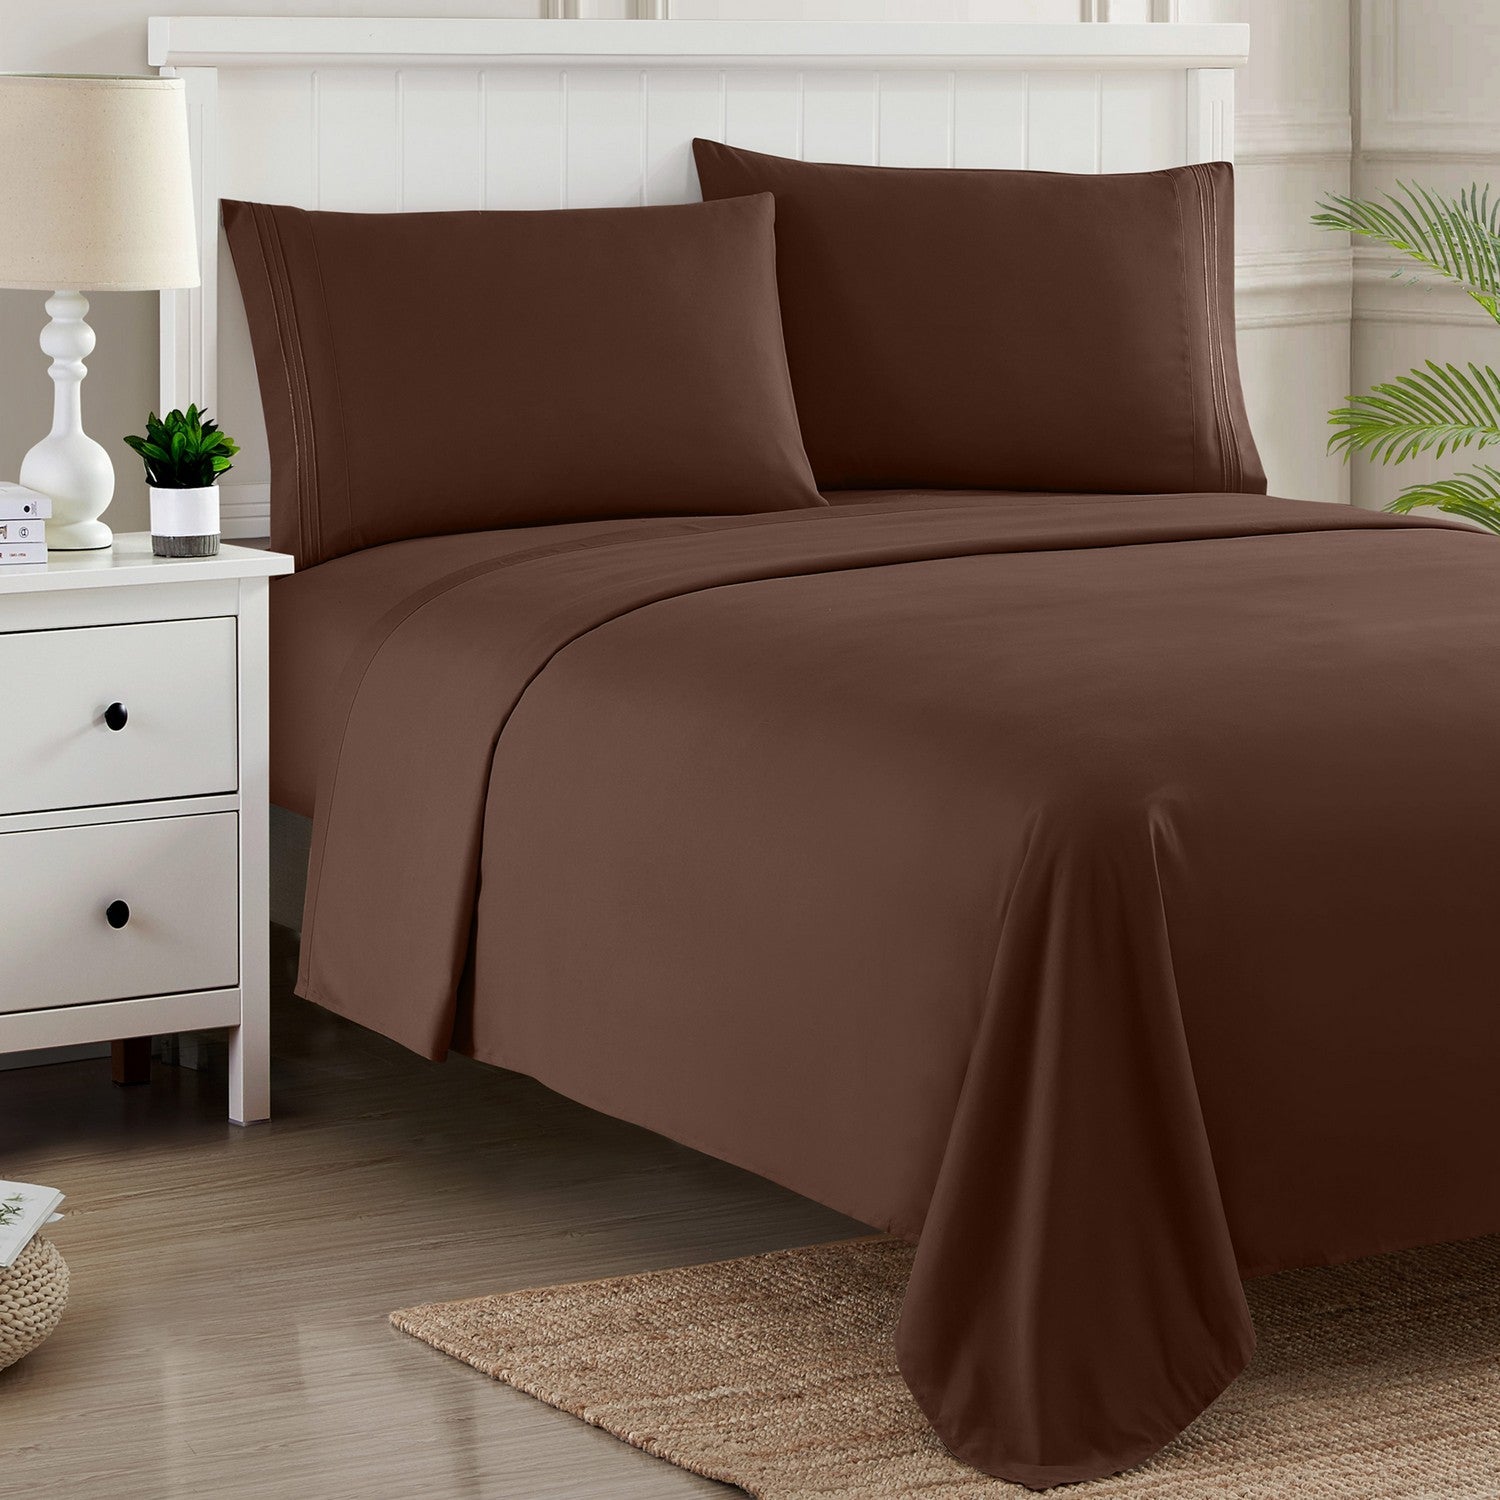 Classic 4-Piece Bed Sheet Set (Chocolate) - Bed